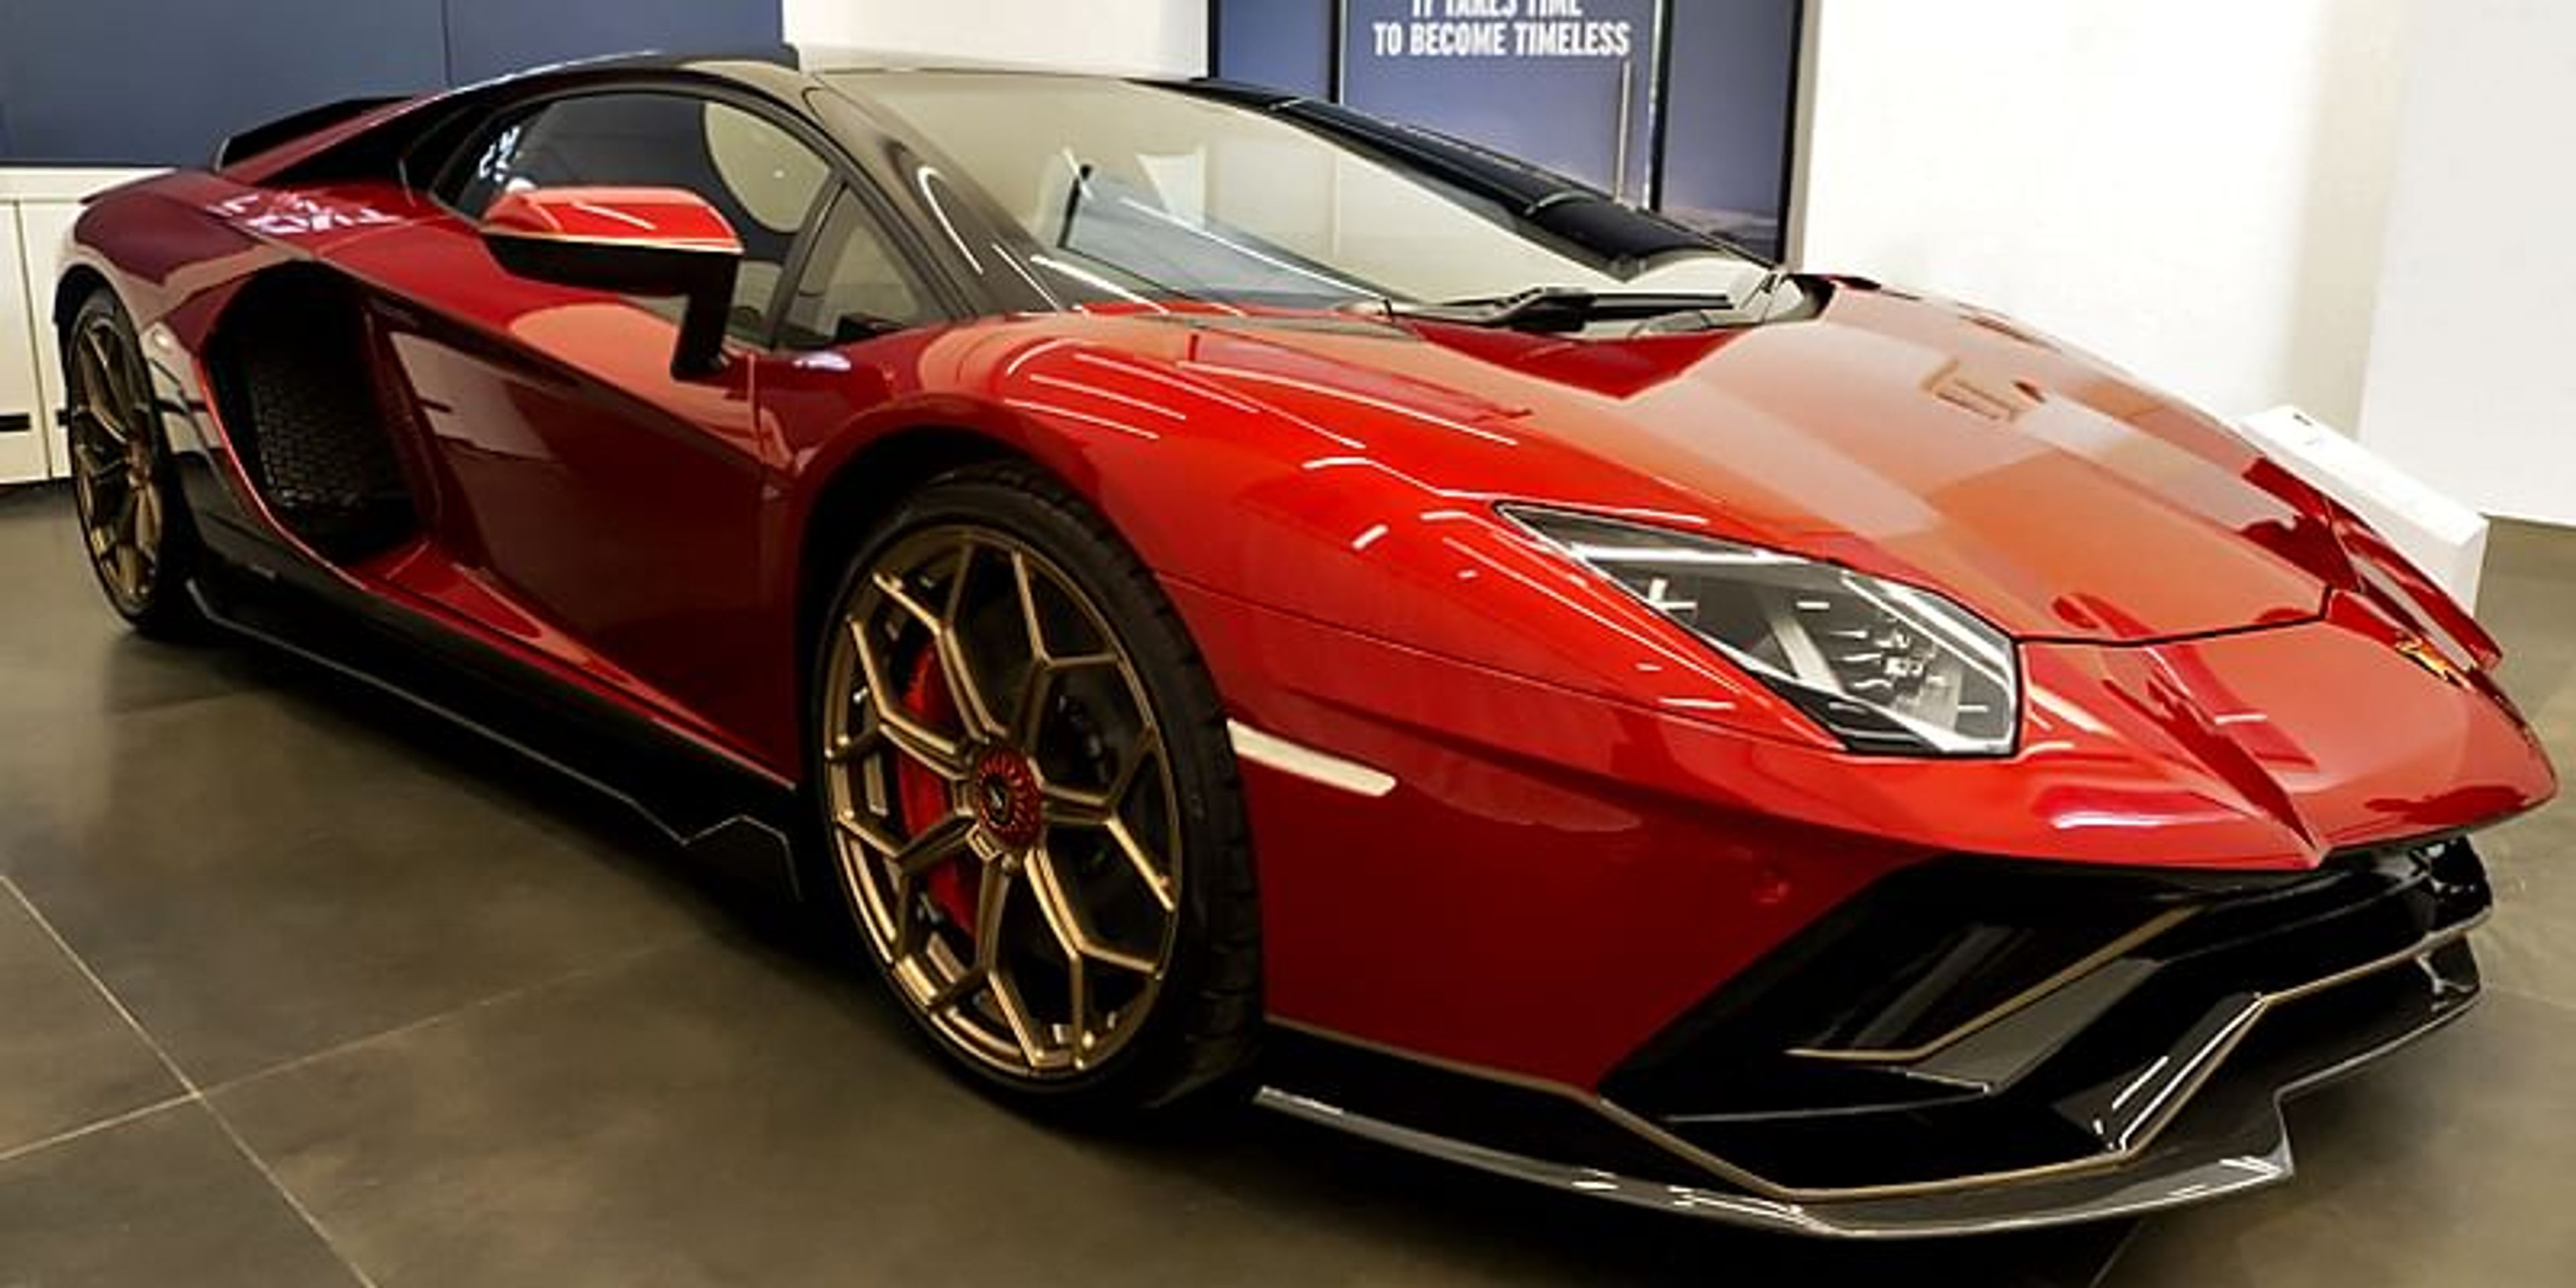 Lamborghini Aventador Ultimae to be launched in India on 15 June